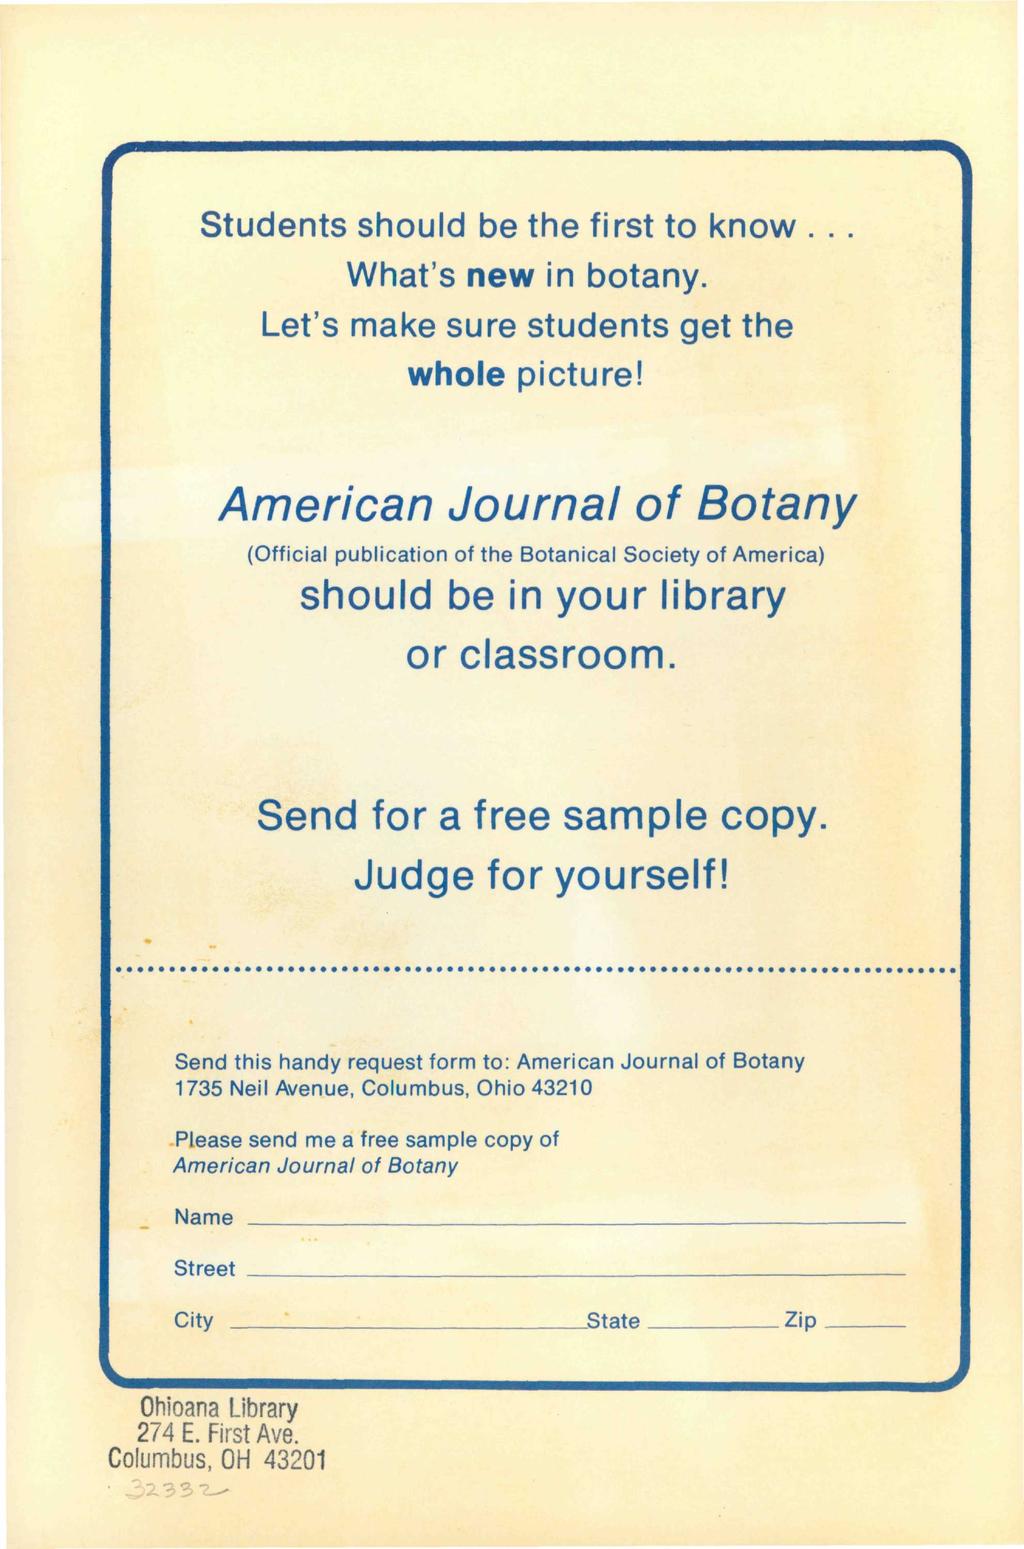 Students should be the first to know... What's new in botany. Let's make sure students get the whole picture!